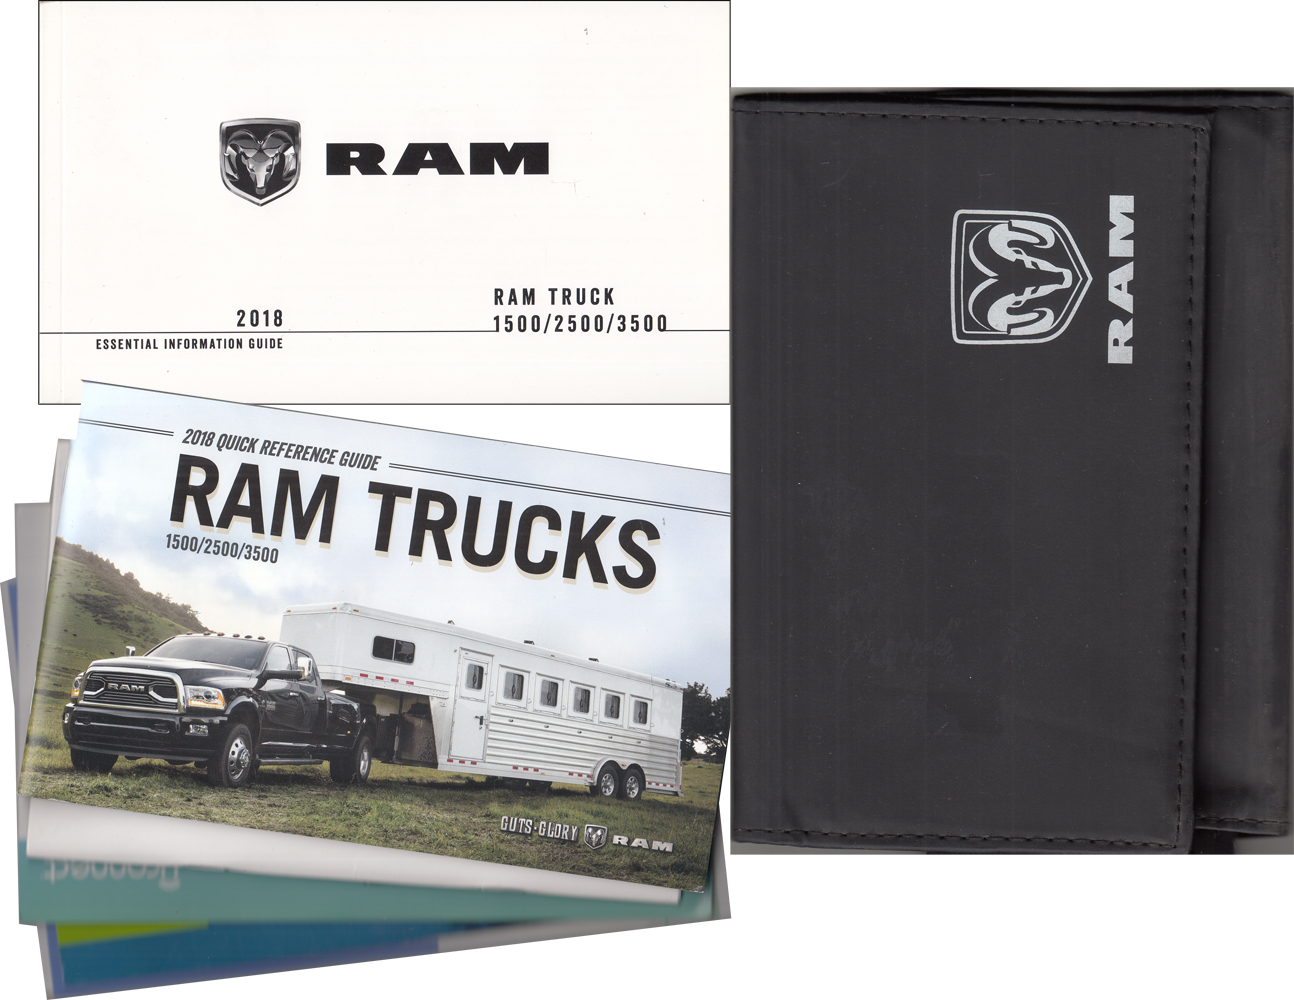 2018 Ram Pickup Truck Essential Information Guide Owner's Manual Package with Case Original 1500 2500 3500